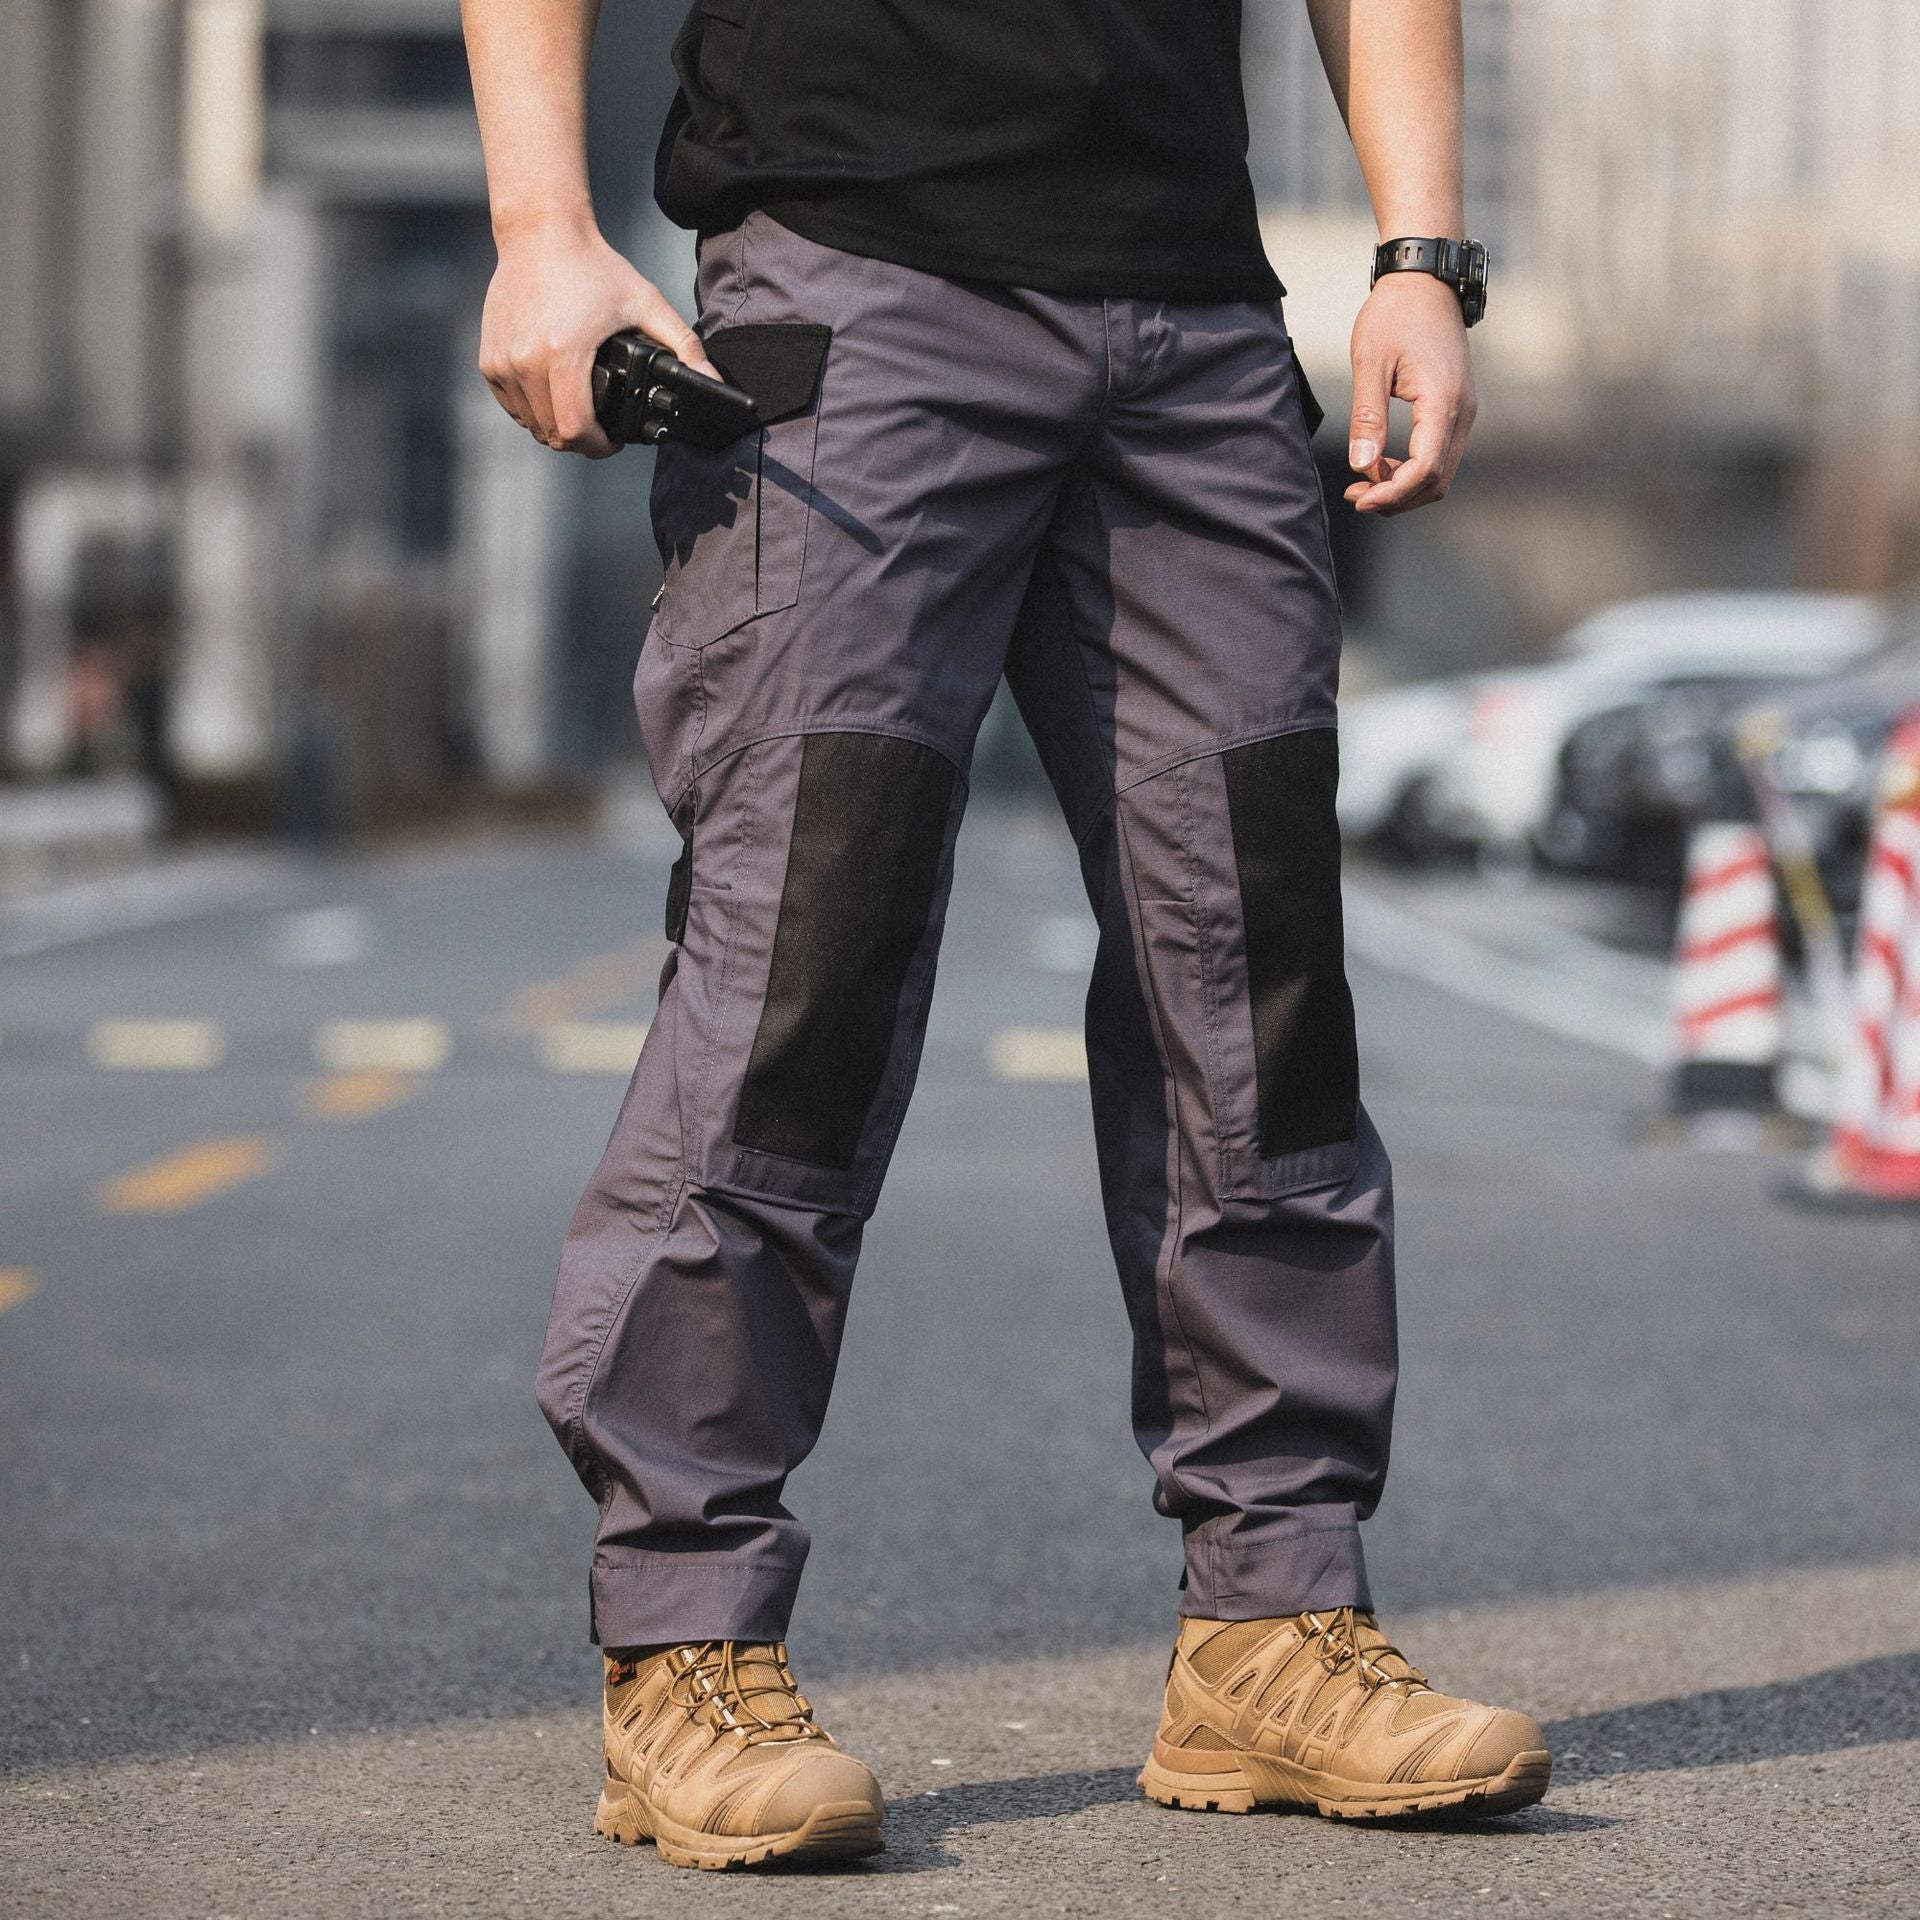 FREE SOLDIER Men's Cargo Pants,Tactical Pants for Men Stretch,Durable  Ripstop EDC Work Pants for Hiking